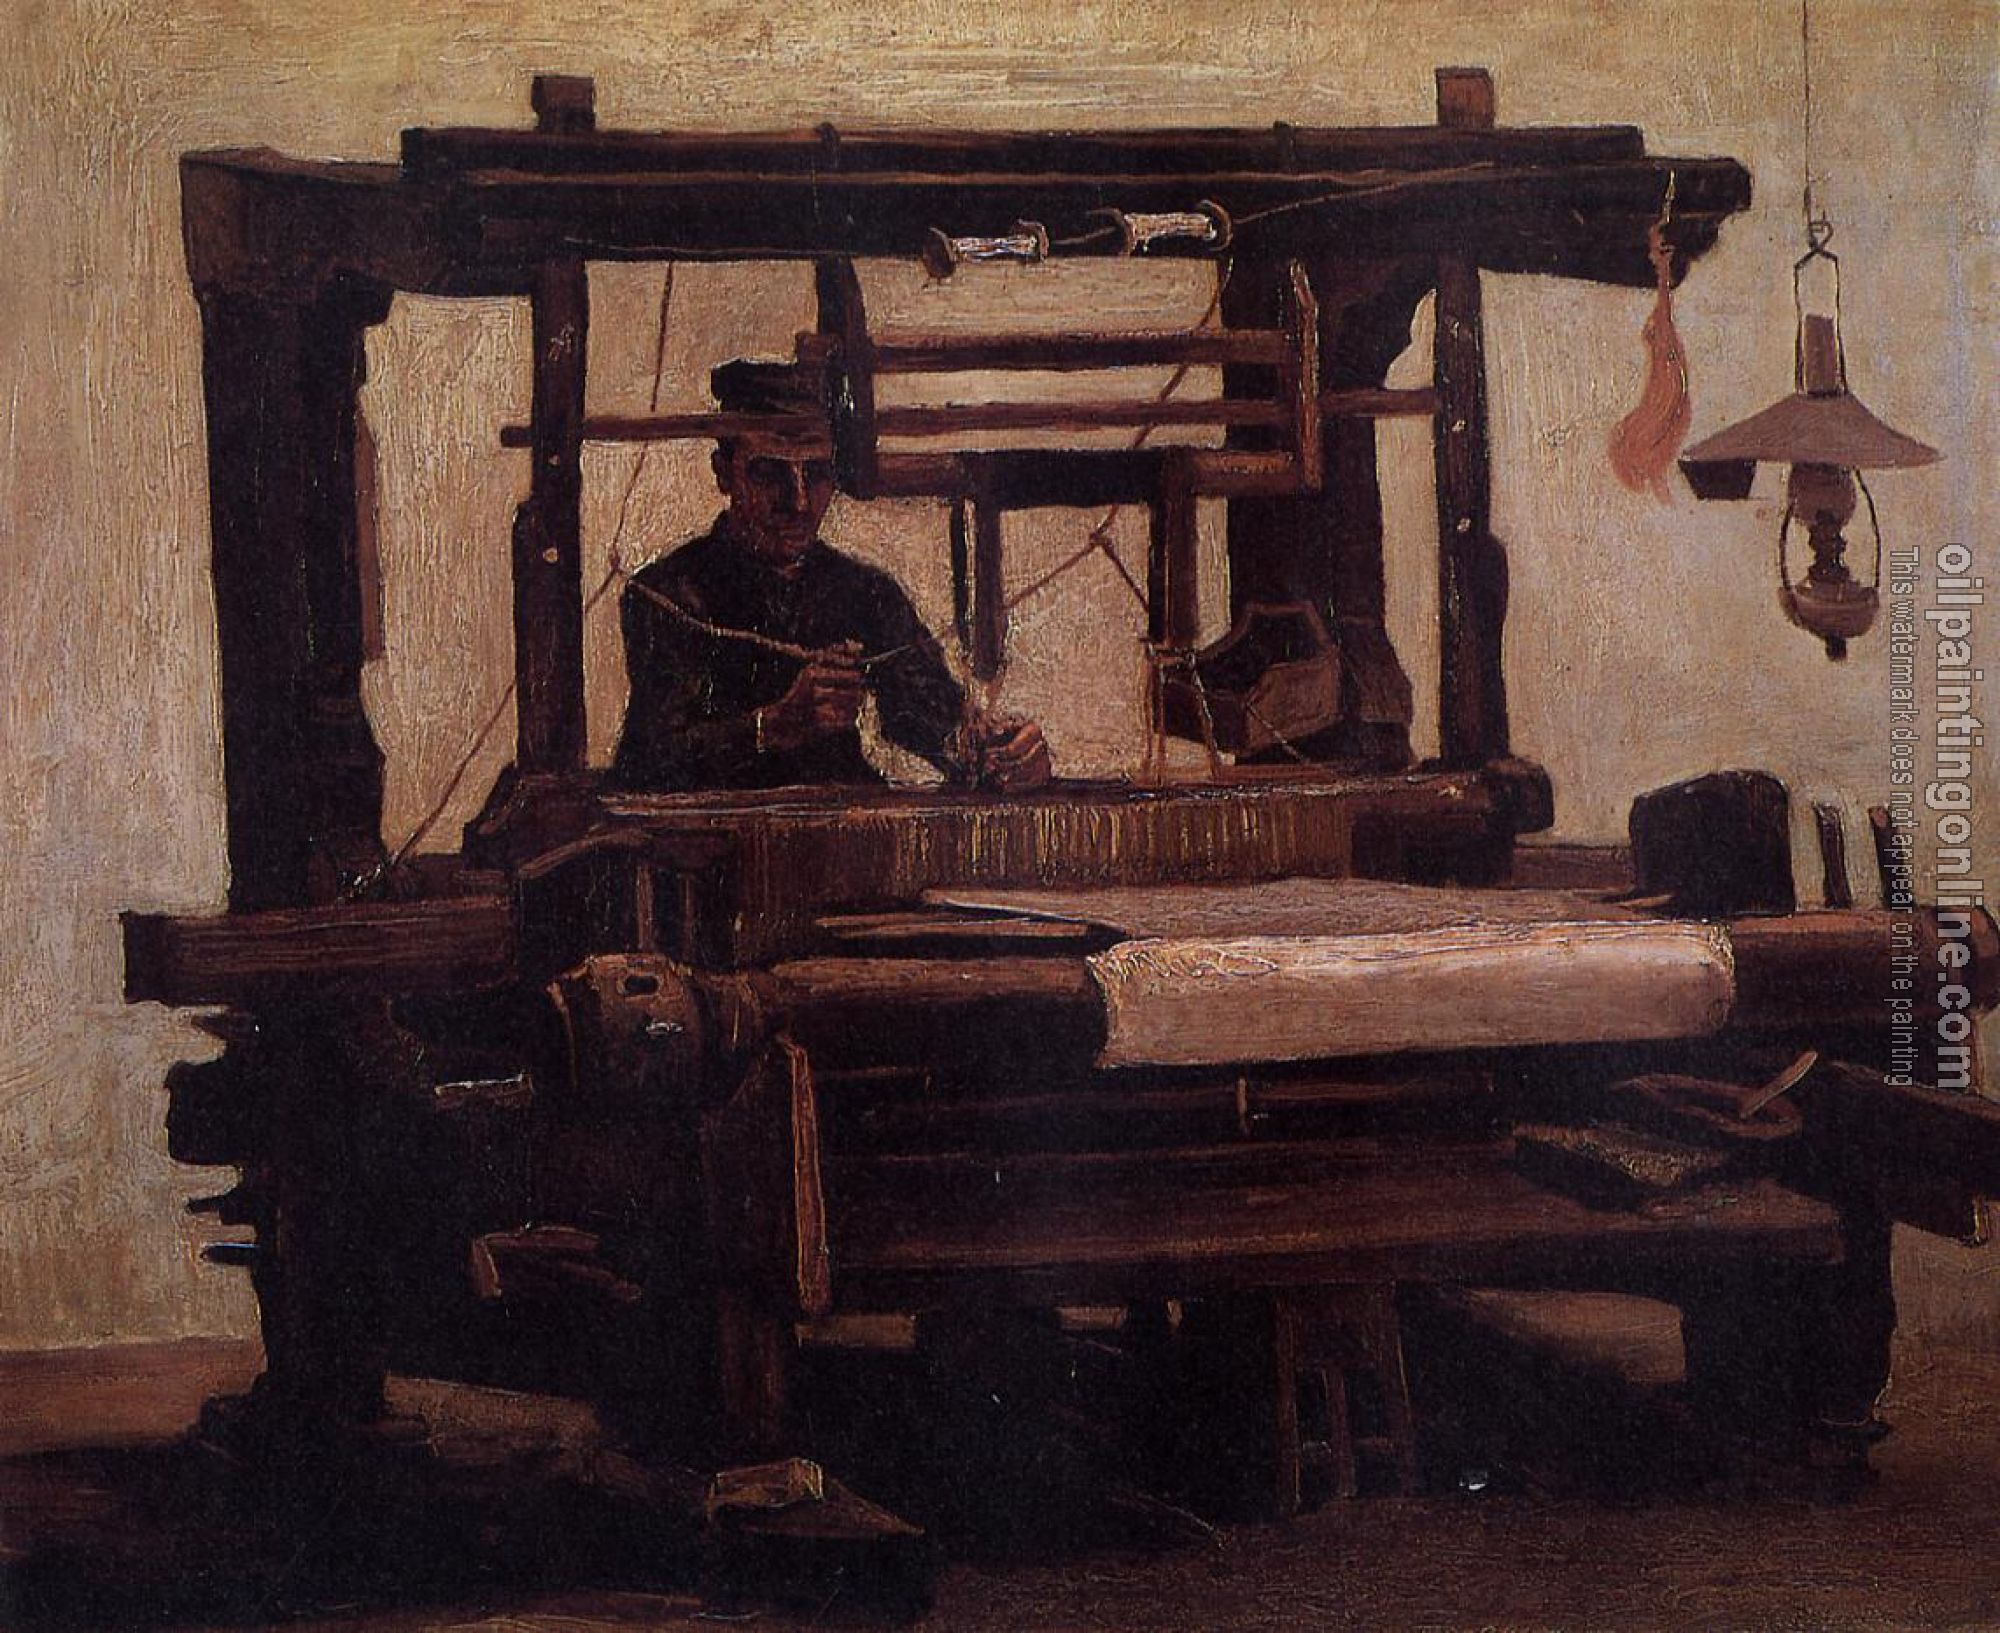 Gogh, Vincent van - Weaver, Seen from the Front